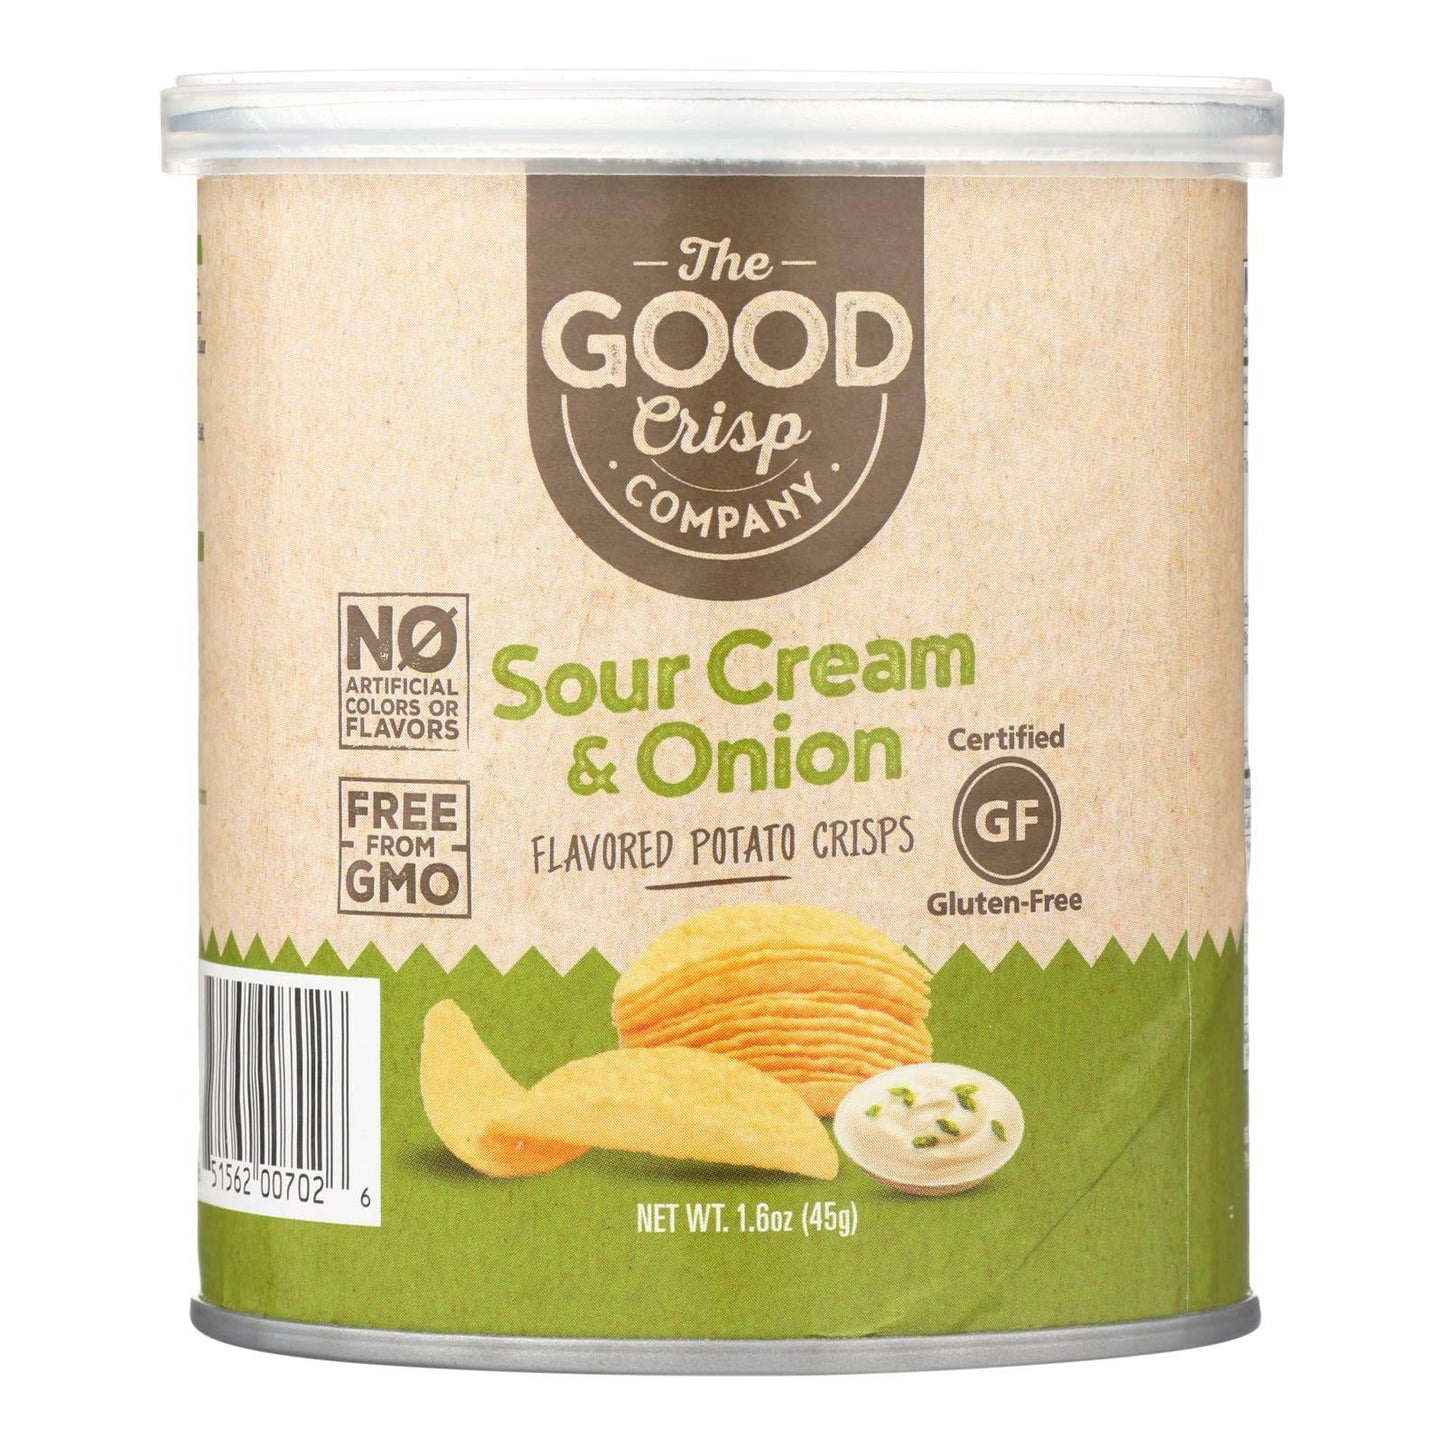 Buy The Good Crisp Company Potato Crisps - Sour Cream And Onion - Case Of 12 - 1.6 Oz  at OnlyNaturals.us